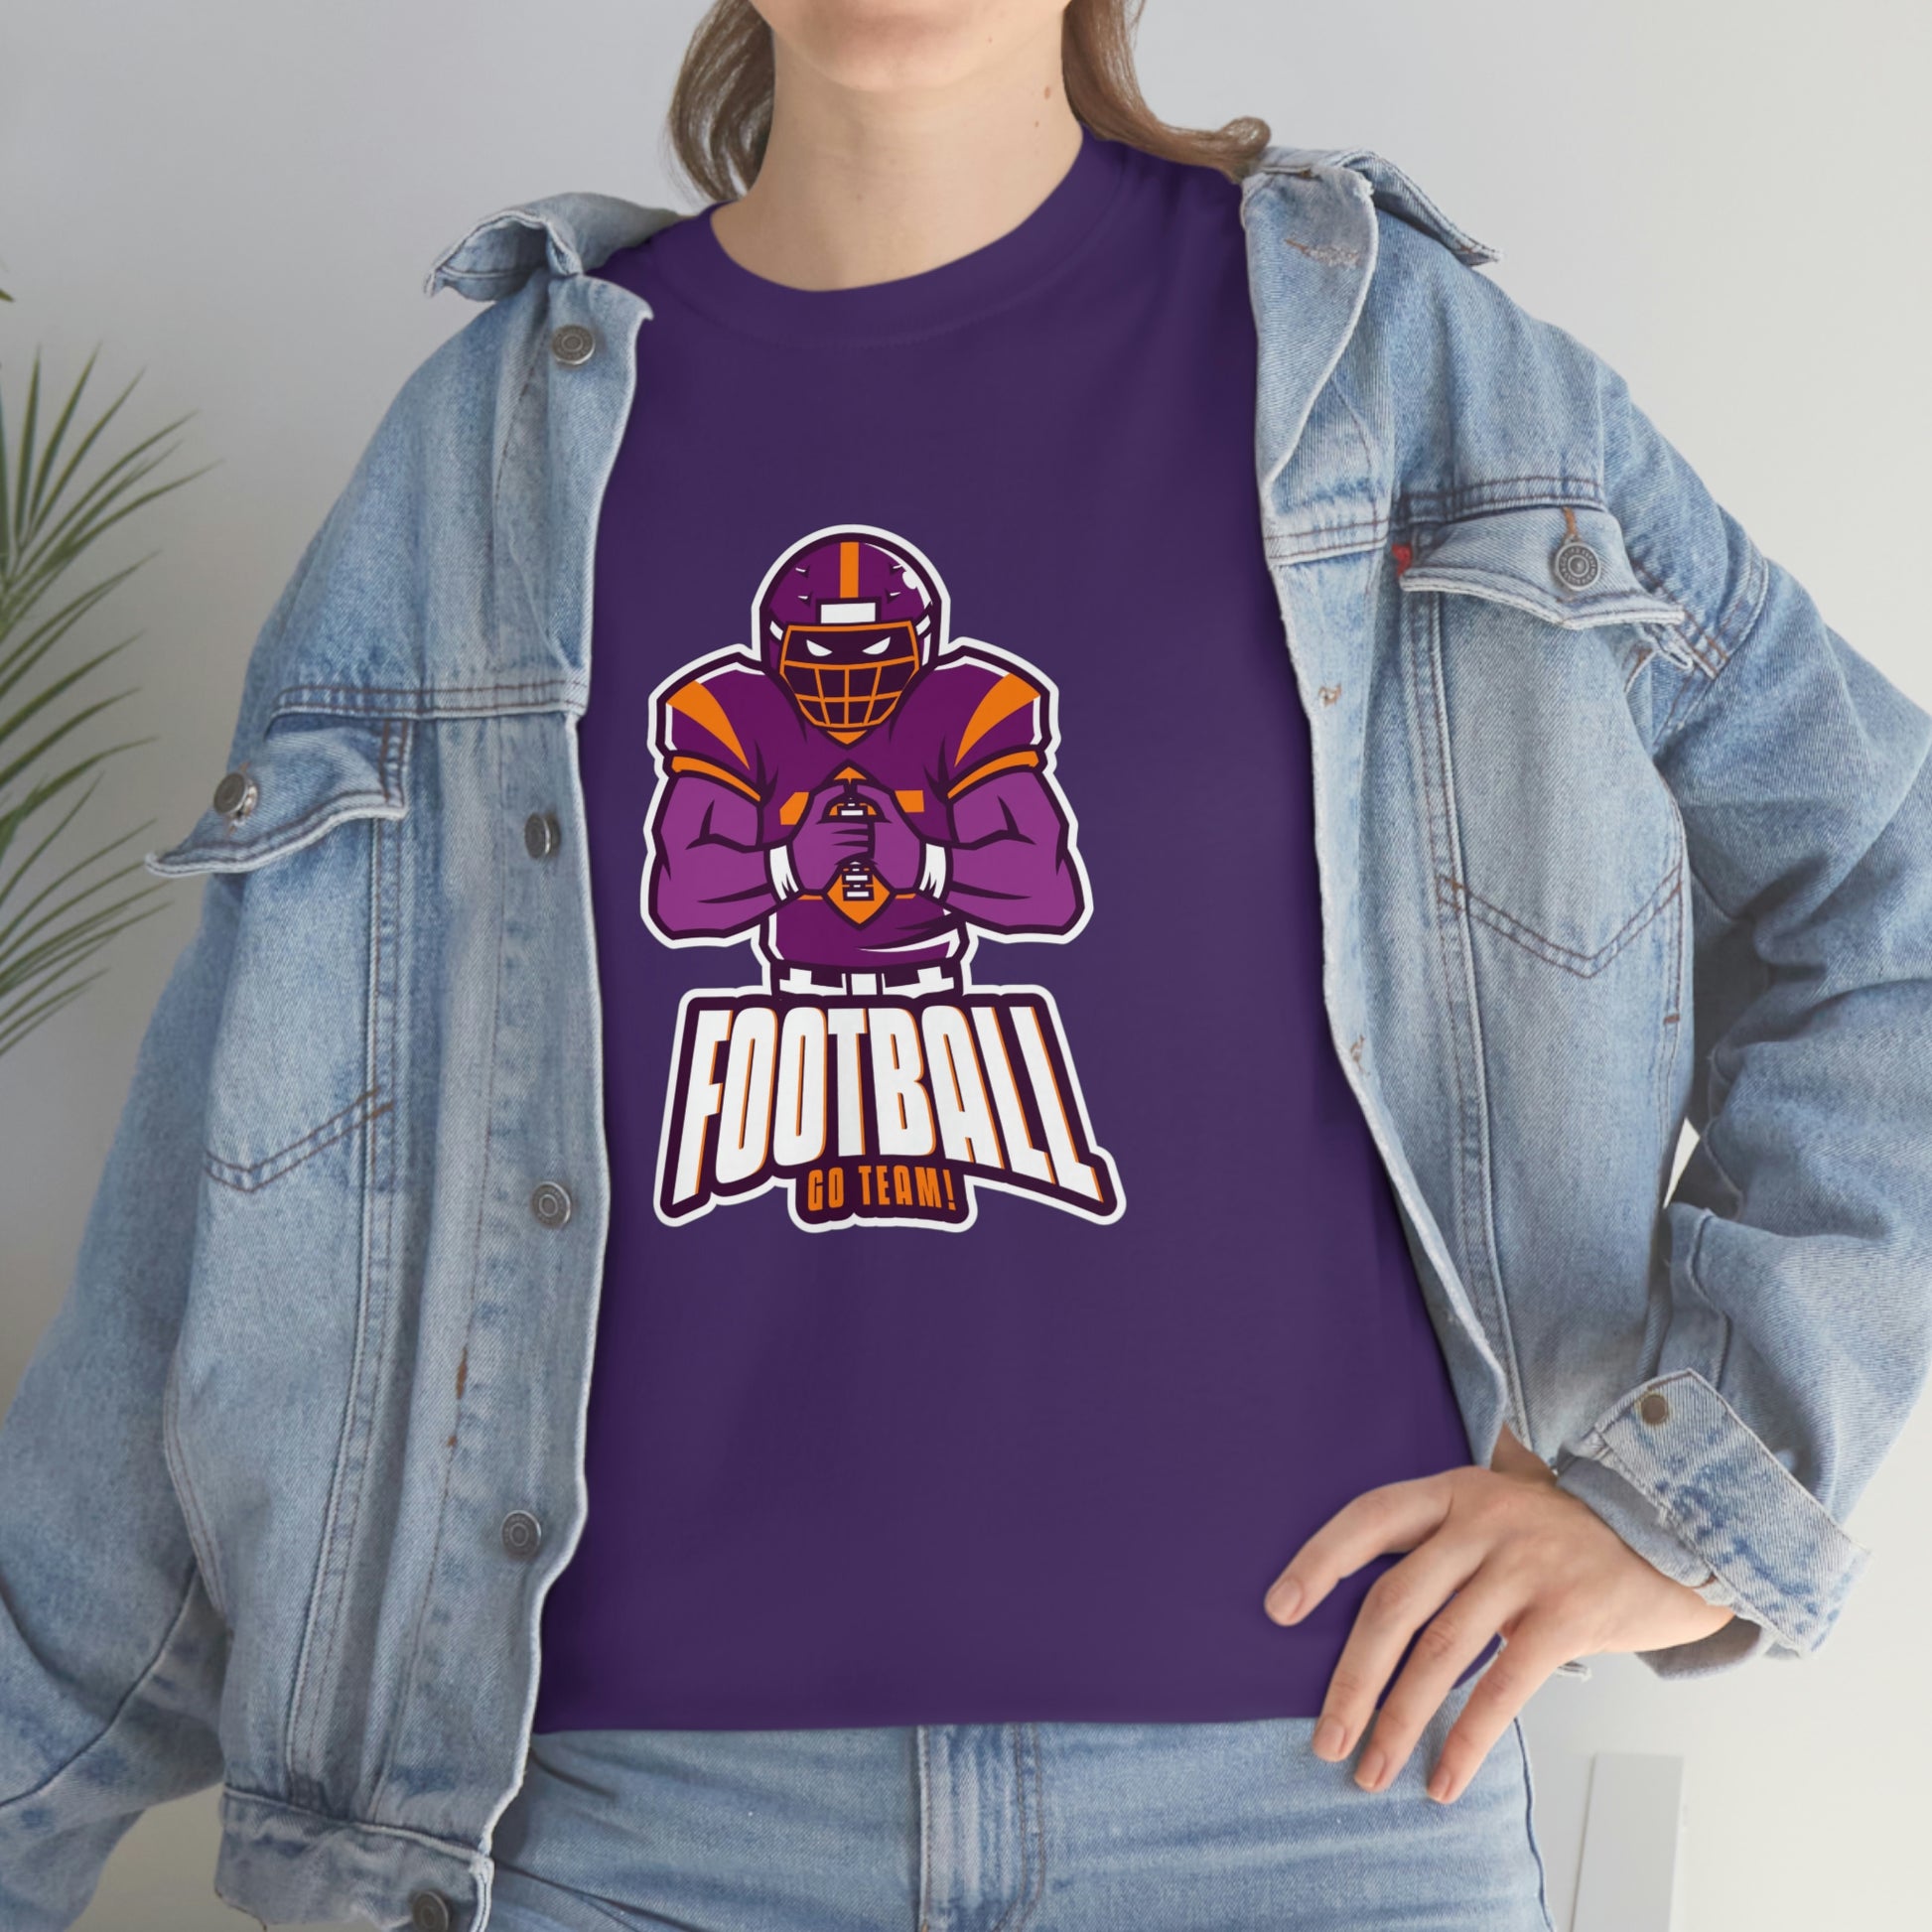 Mock up of the Purple shirt worn by a woman under a denim jacket